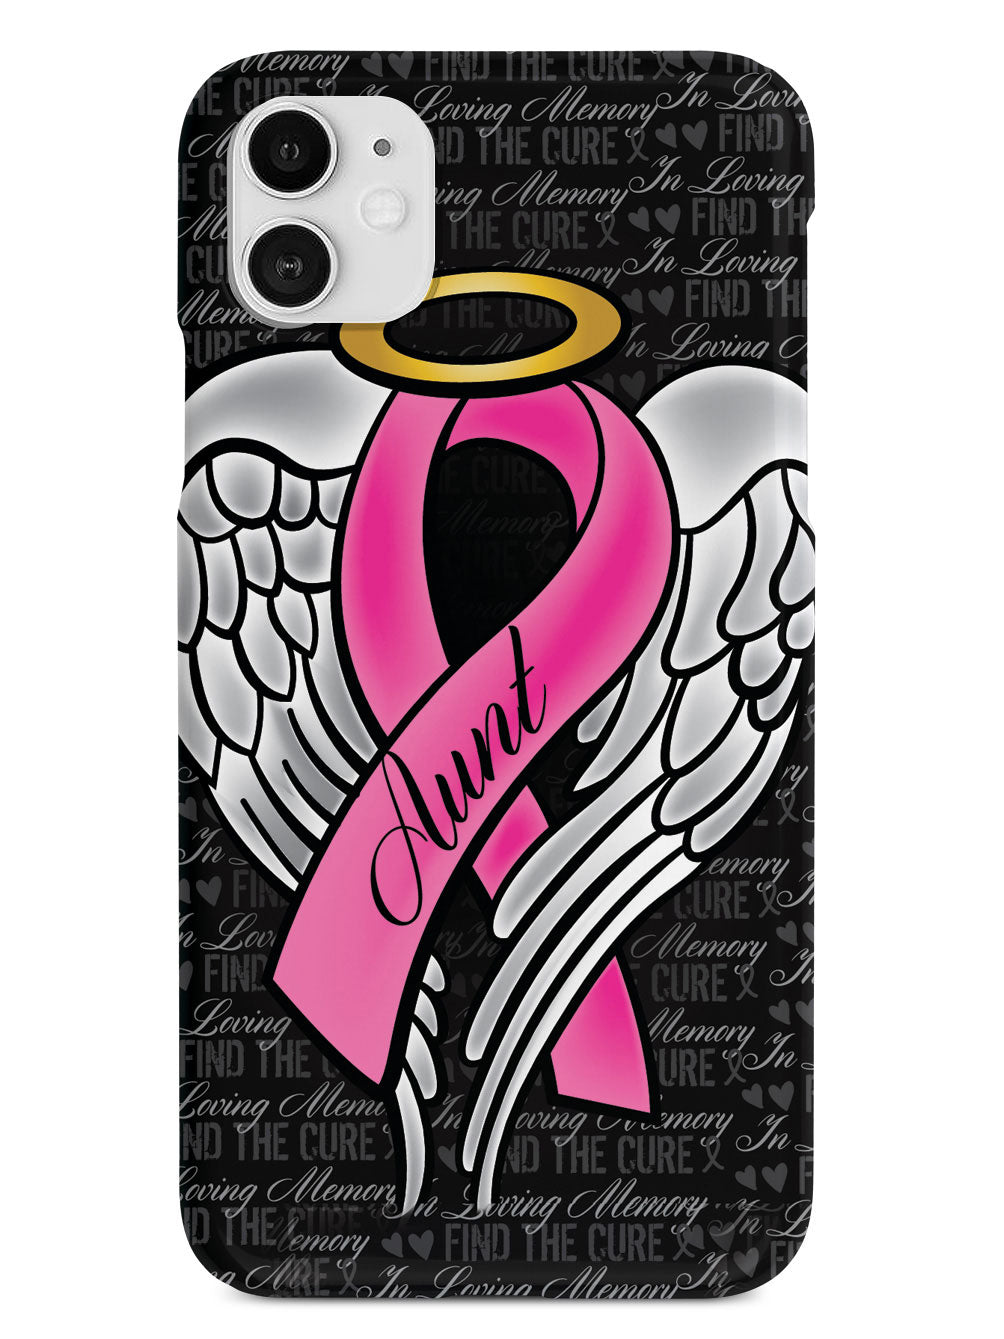 In Loving Memory of My Aunt - Pink Ribbon Case